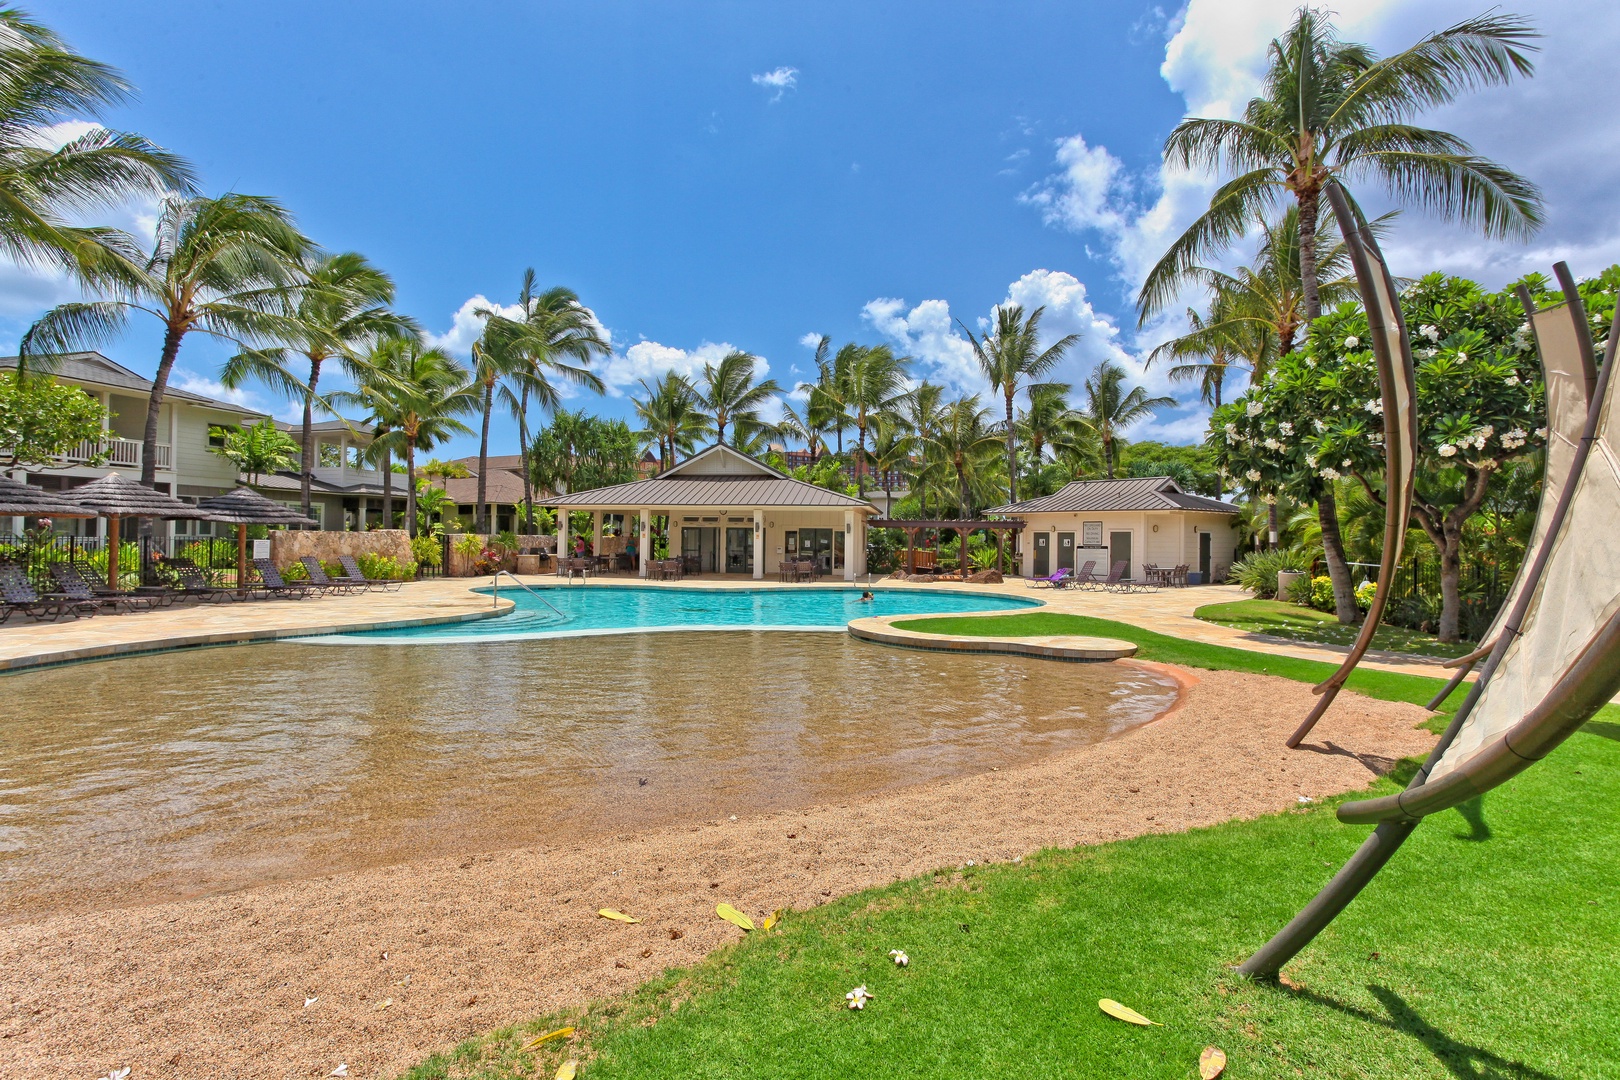 Kapolei Vacation Rentals, Coconut Plantation 1214-2 Aloha Lagoons - The area also features a sand bottom pool nestled under swaying palm trees.